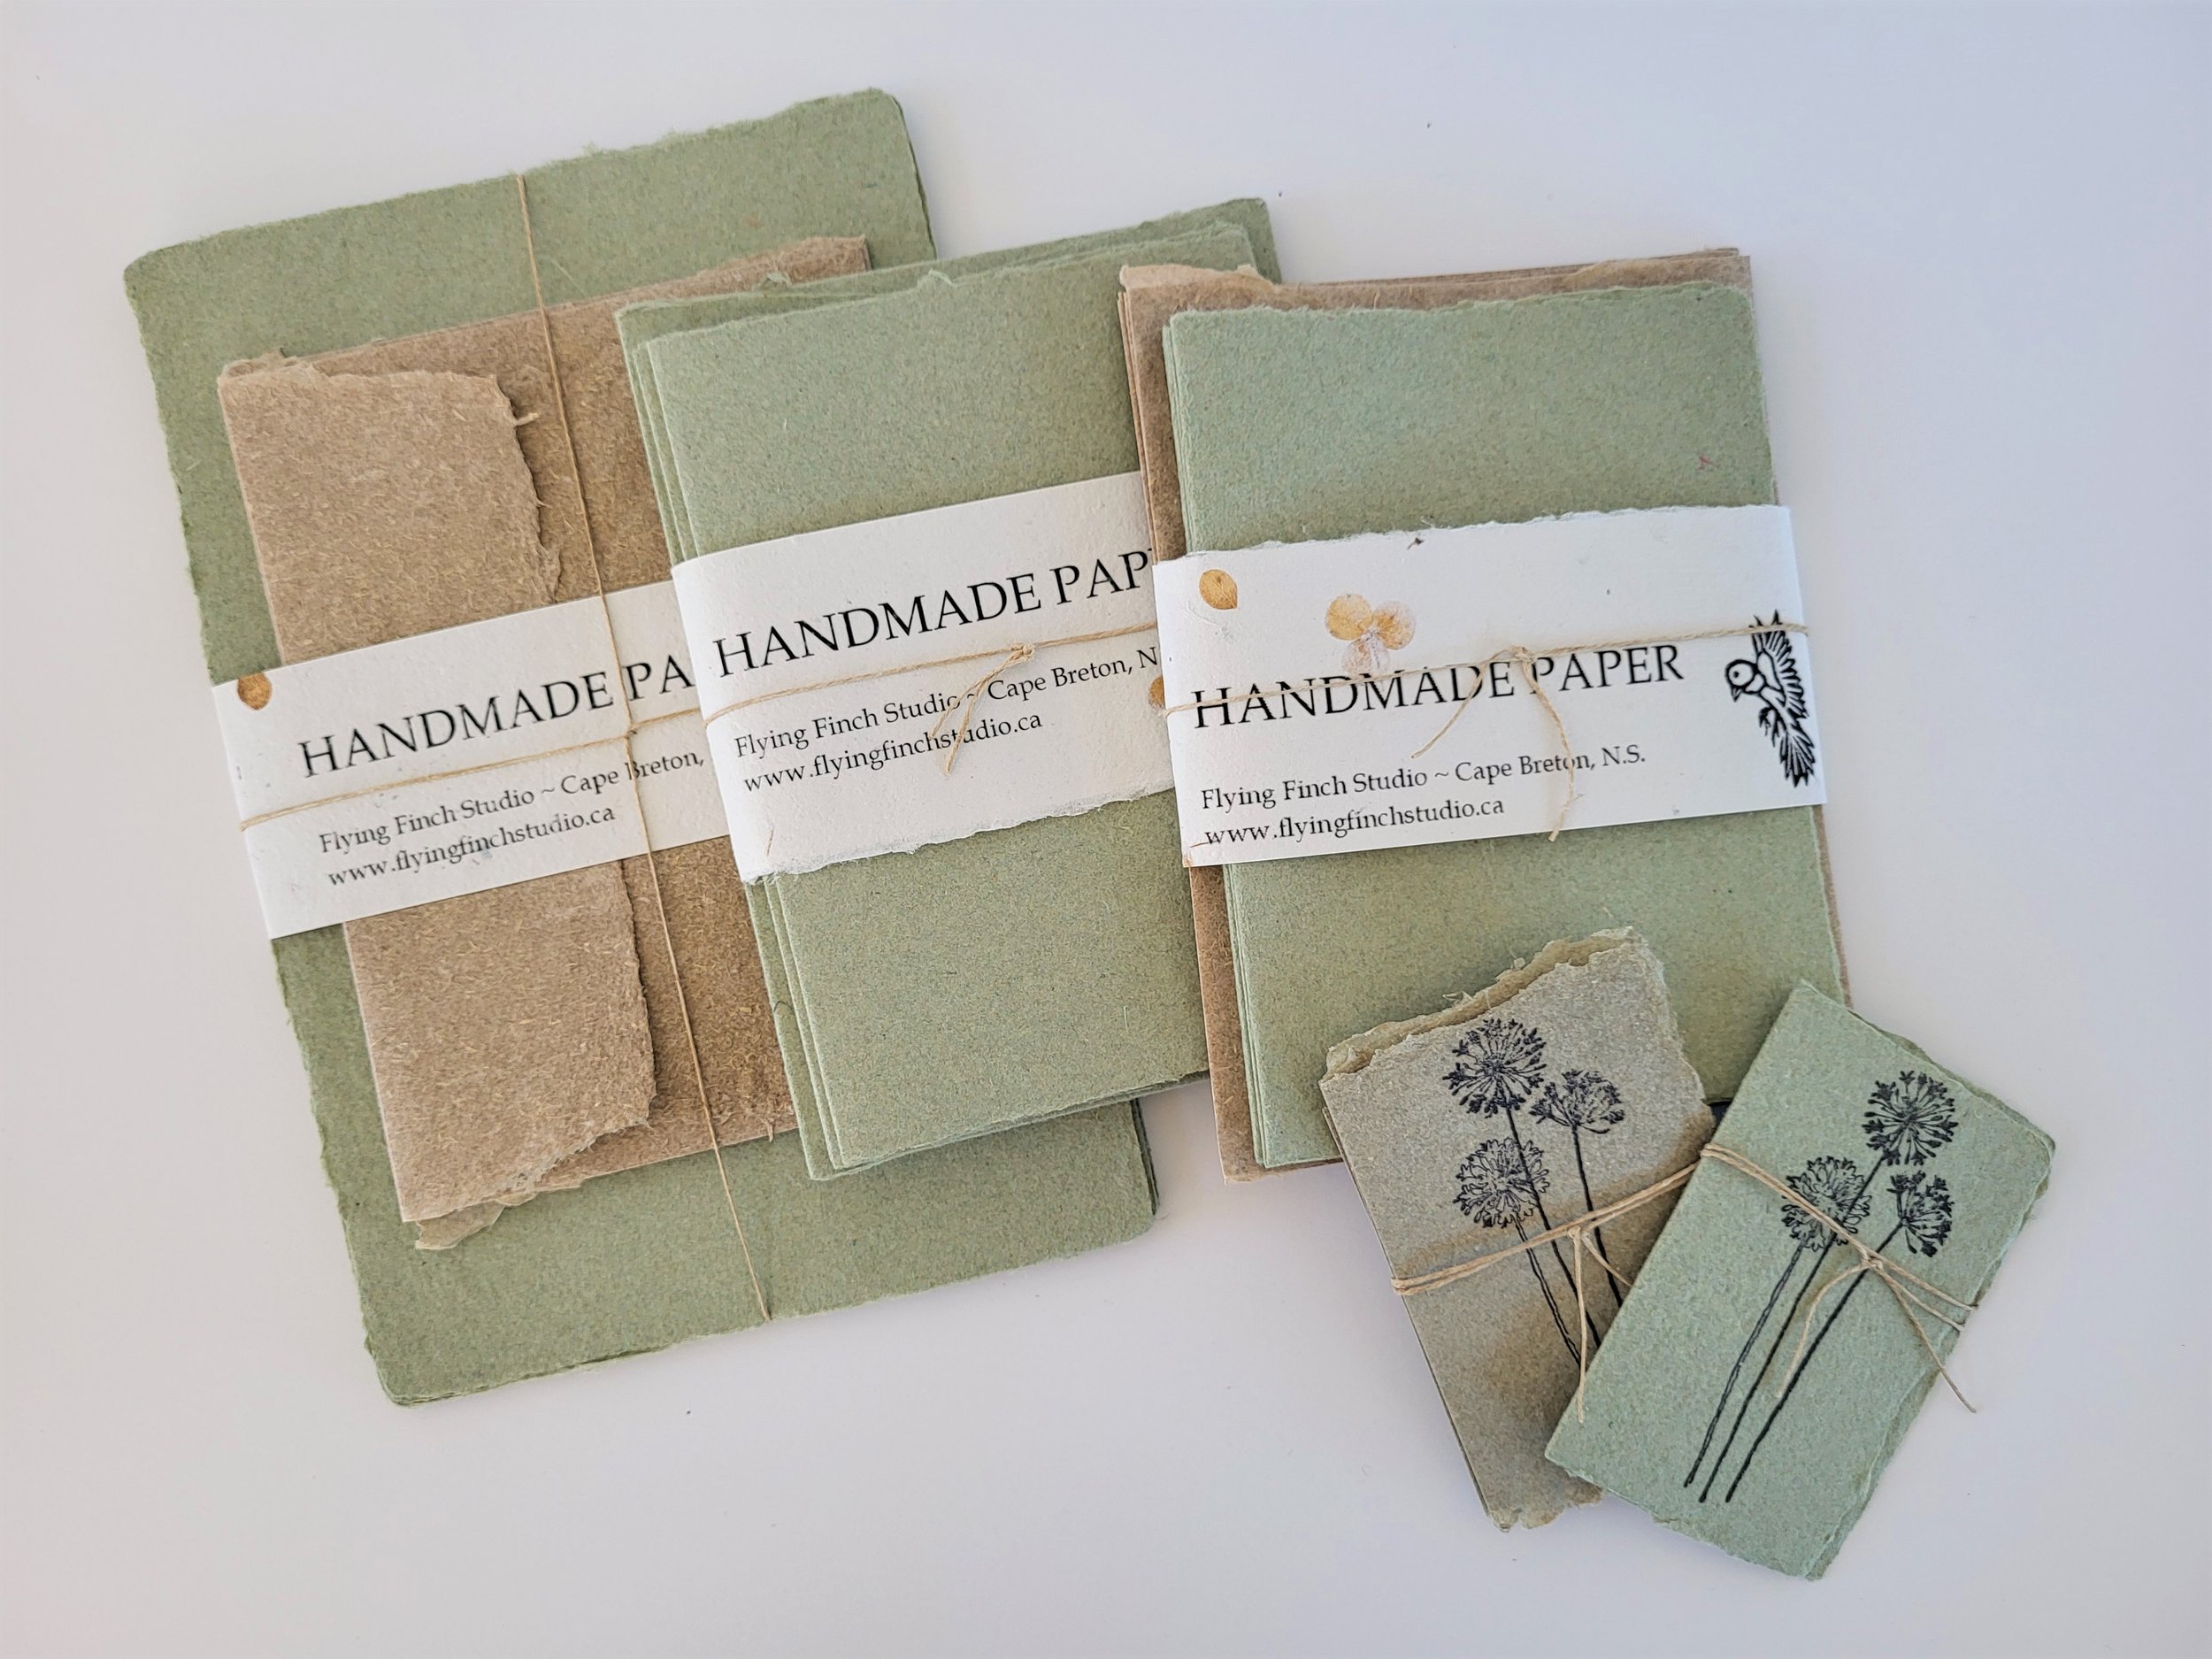 Hand Papermaking Supplies From The Paperwright, Canada